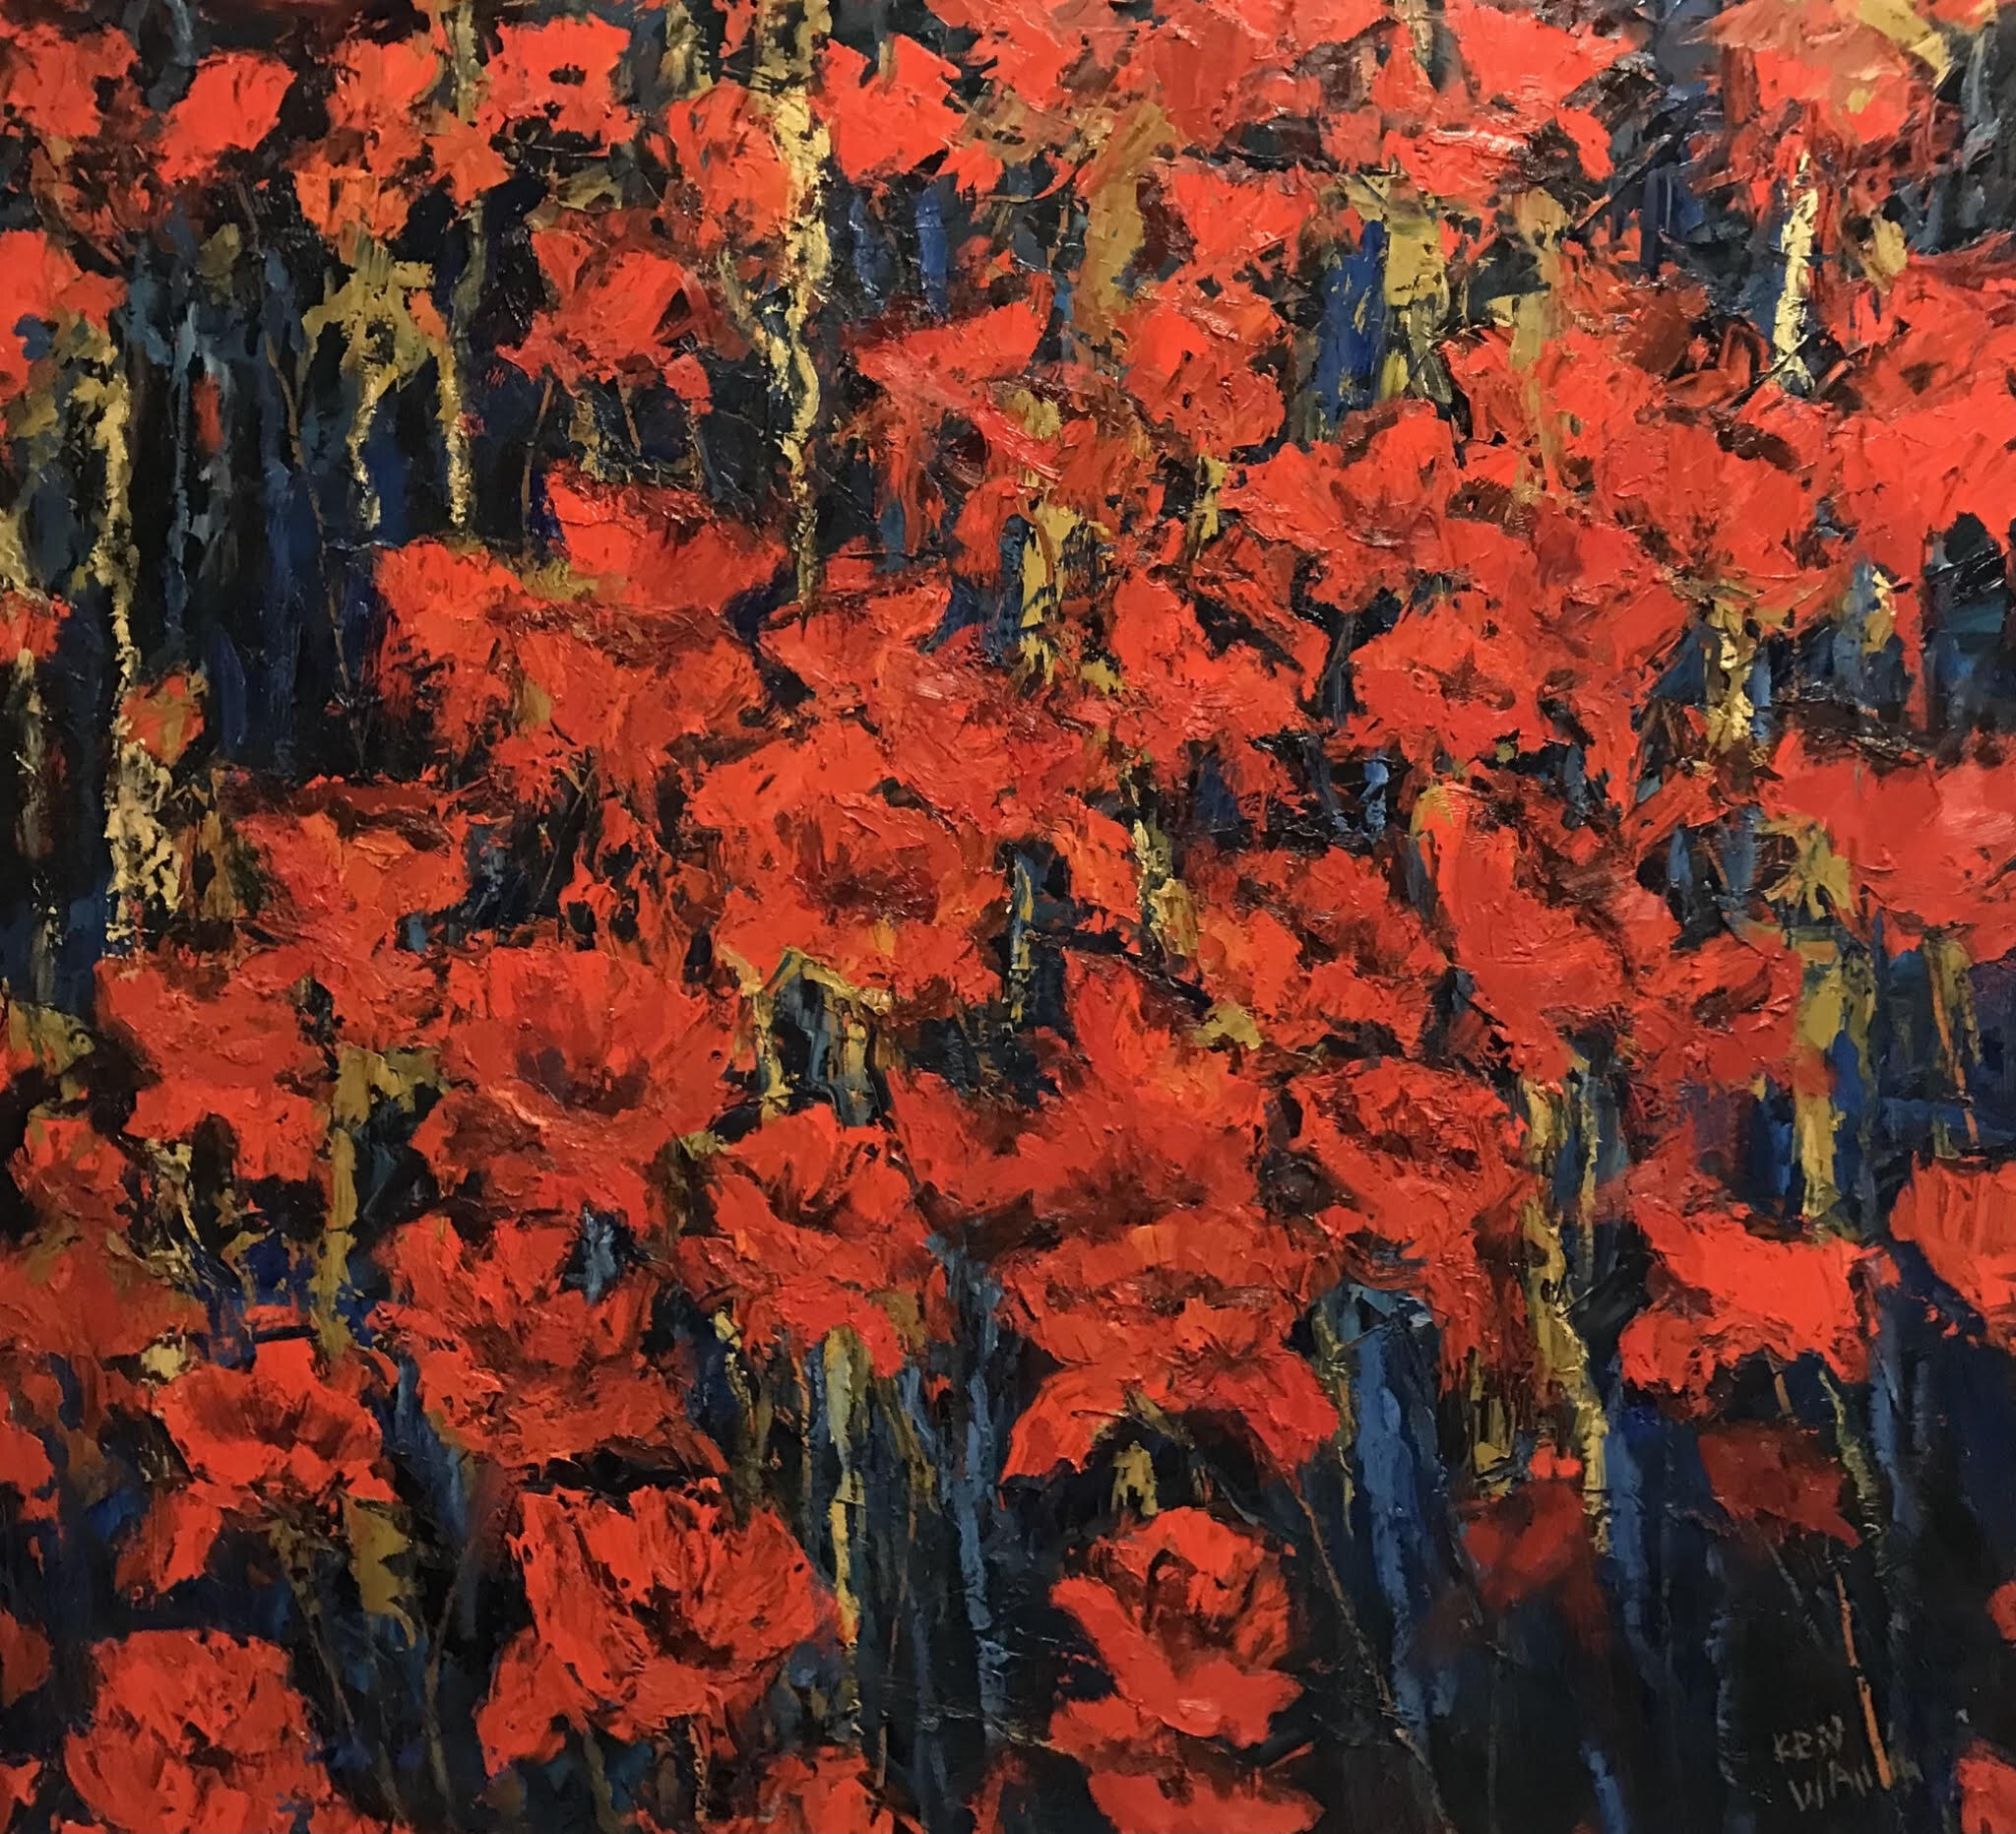 Field of Poppies. Oil on Canvas © 2021 Ken Wallin. All Rights Reserved.